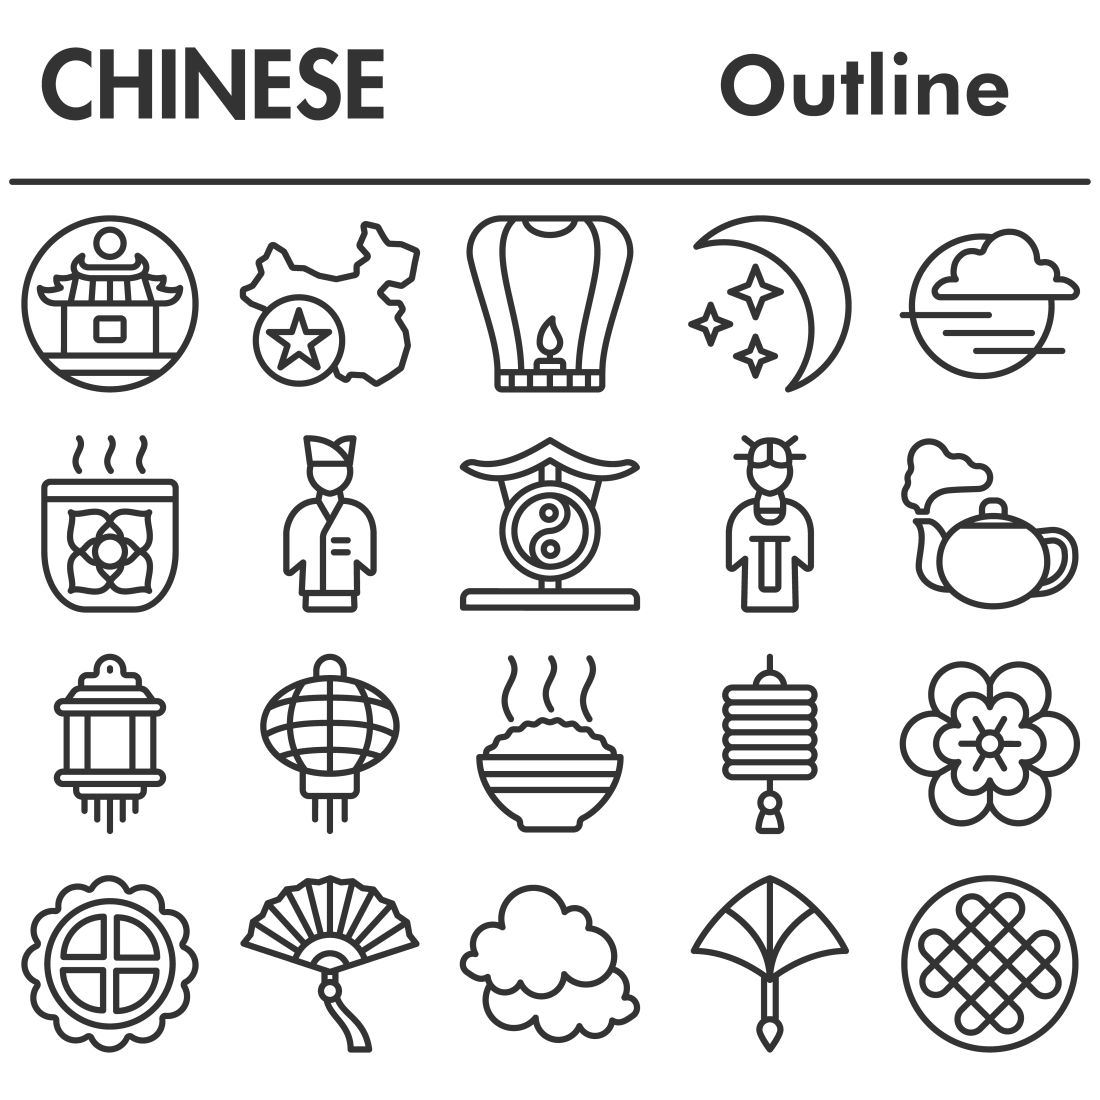 Chinese icons set, outline style cover image.